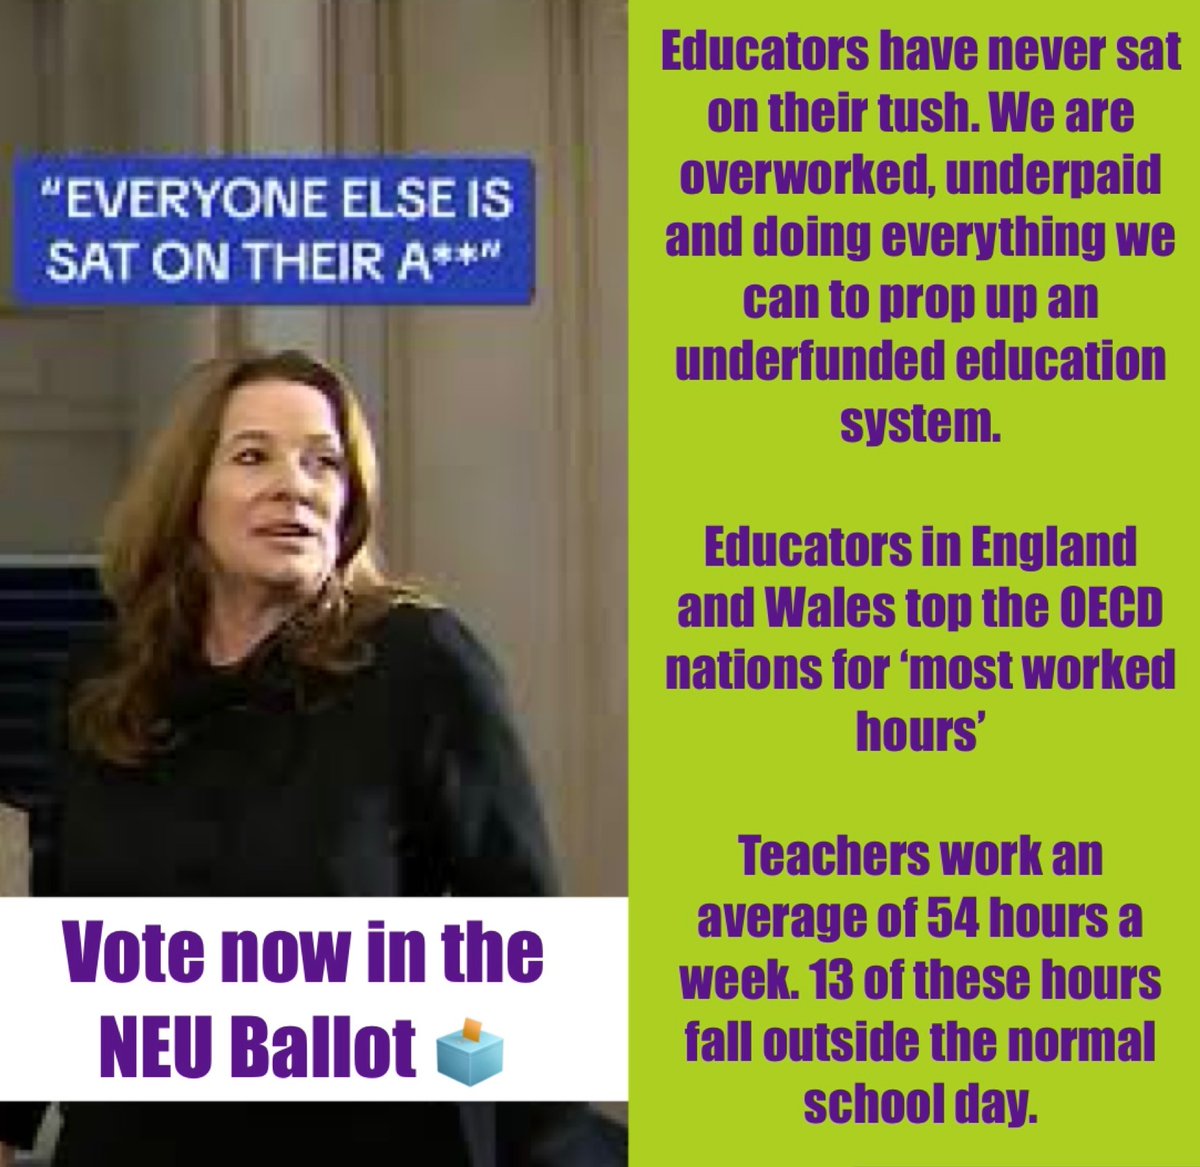 Gillian is so wrong on this one. Educators have never sat on their a**e. We give our life and soul to this job. The Secretary for education is: Deflecting Failing Not investing & Denying funding Self serving Poverty approving DELUSIONAL Vote YES in the NEU ballot 🗳️